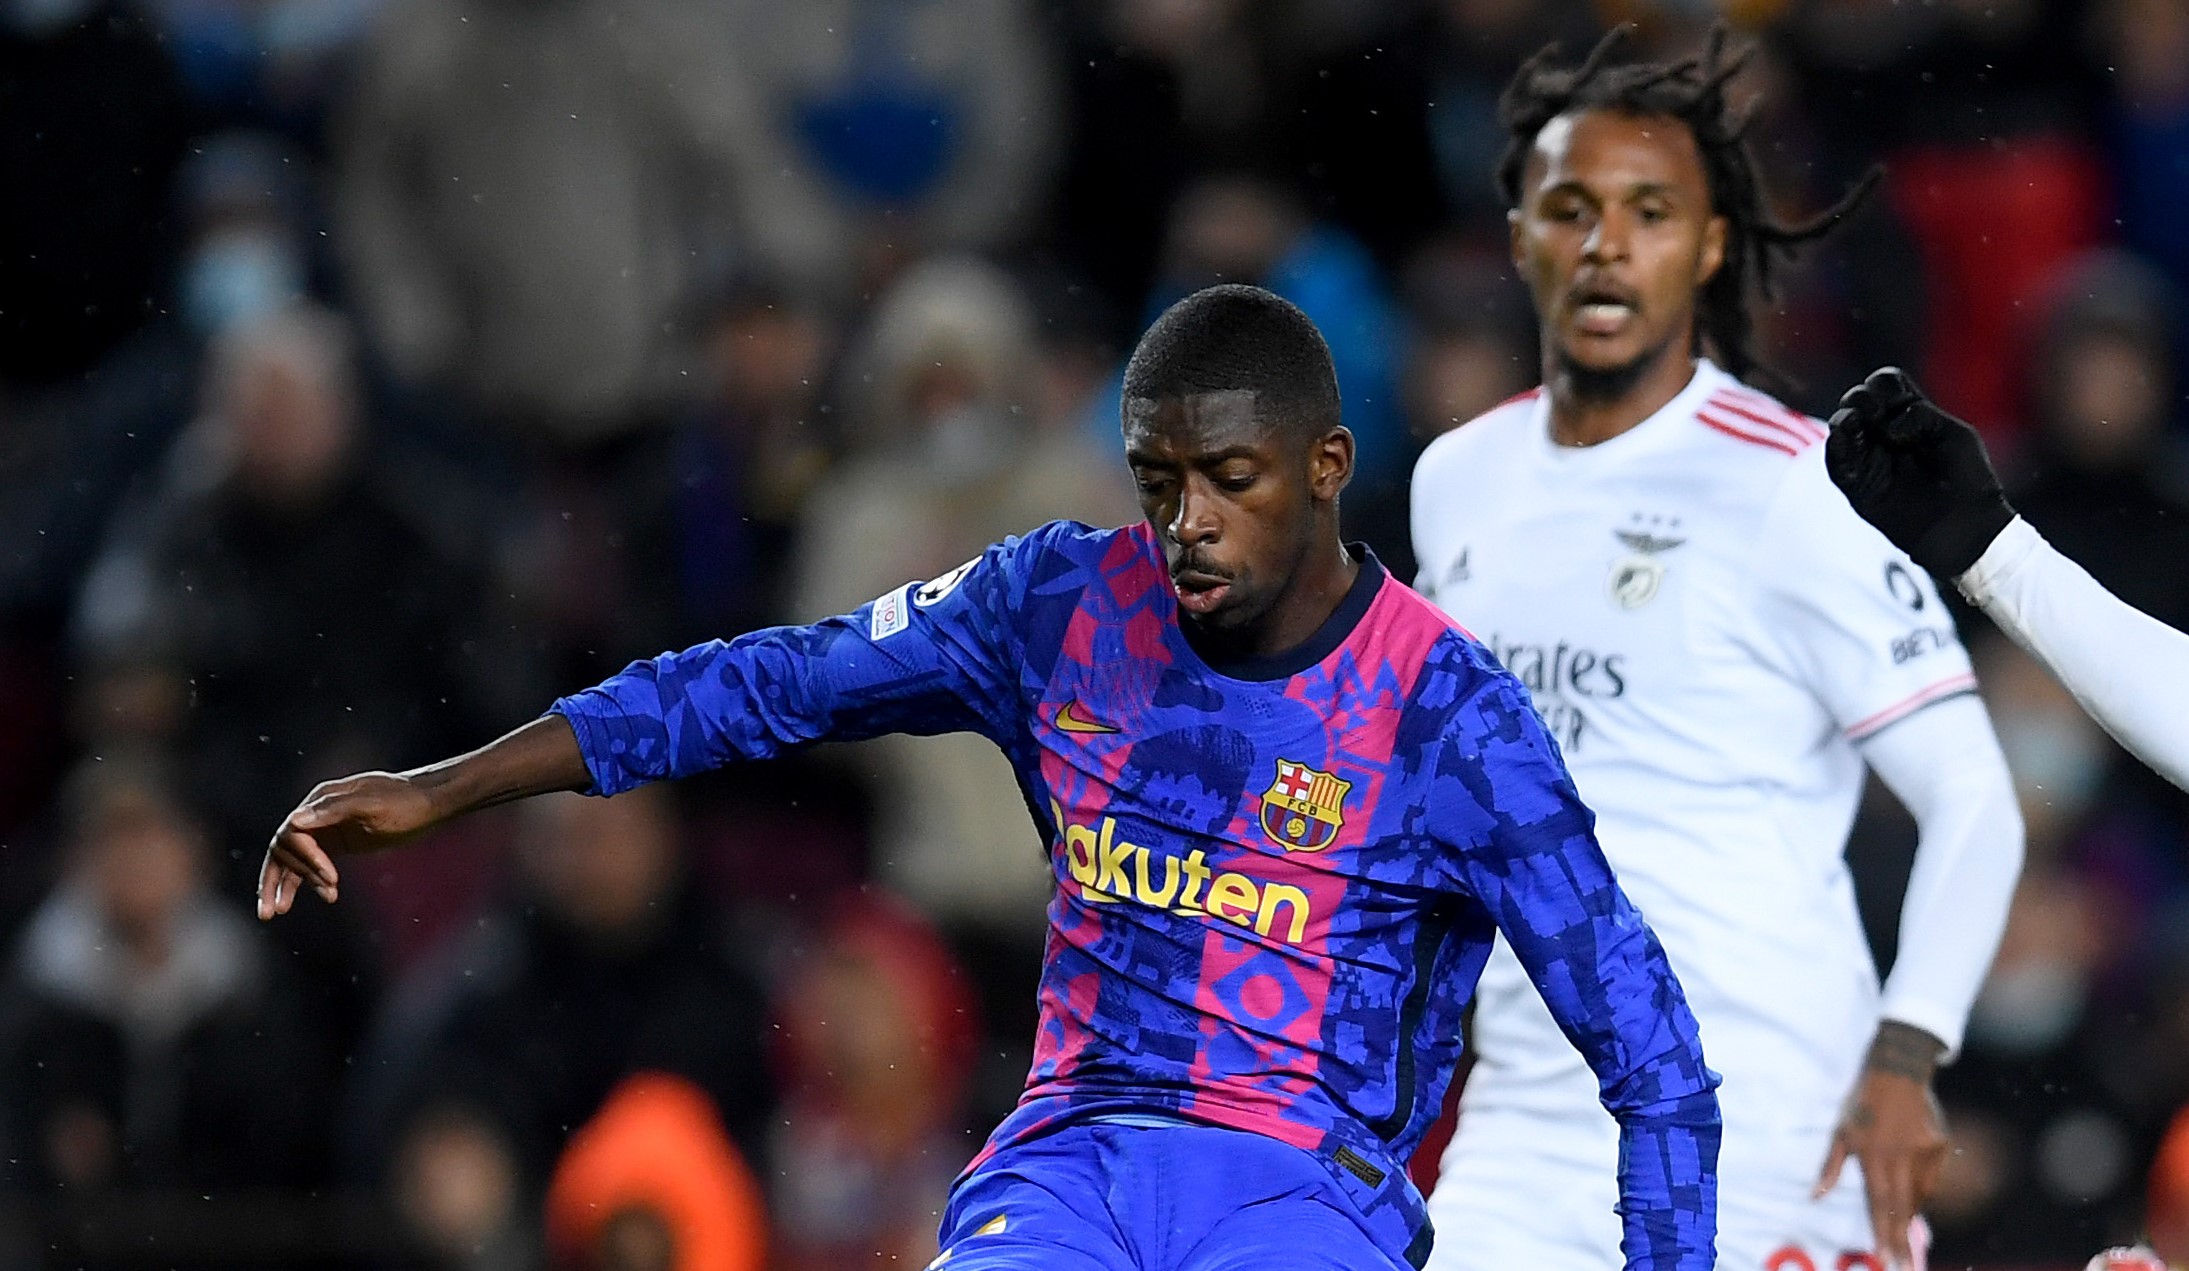 Barcelona’s plan to flatter Ousmane Dembélé into new contract might just have backfired